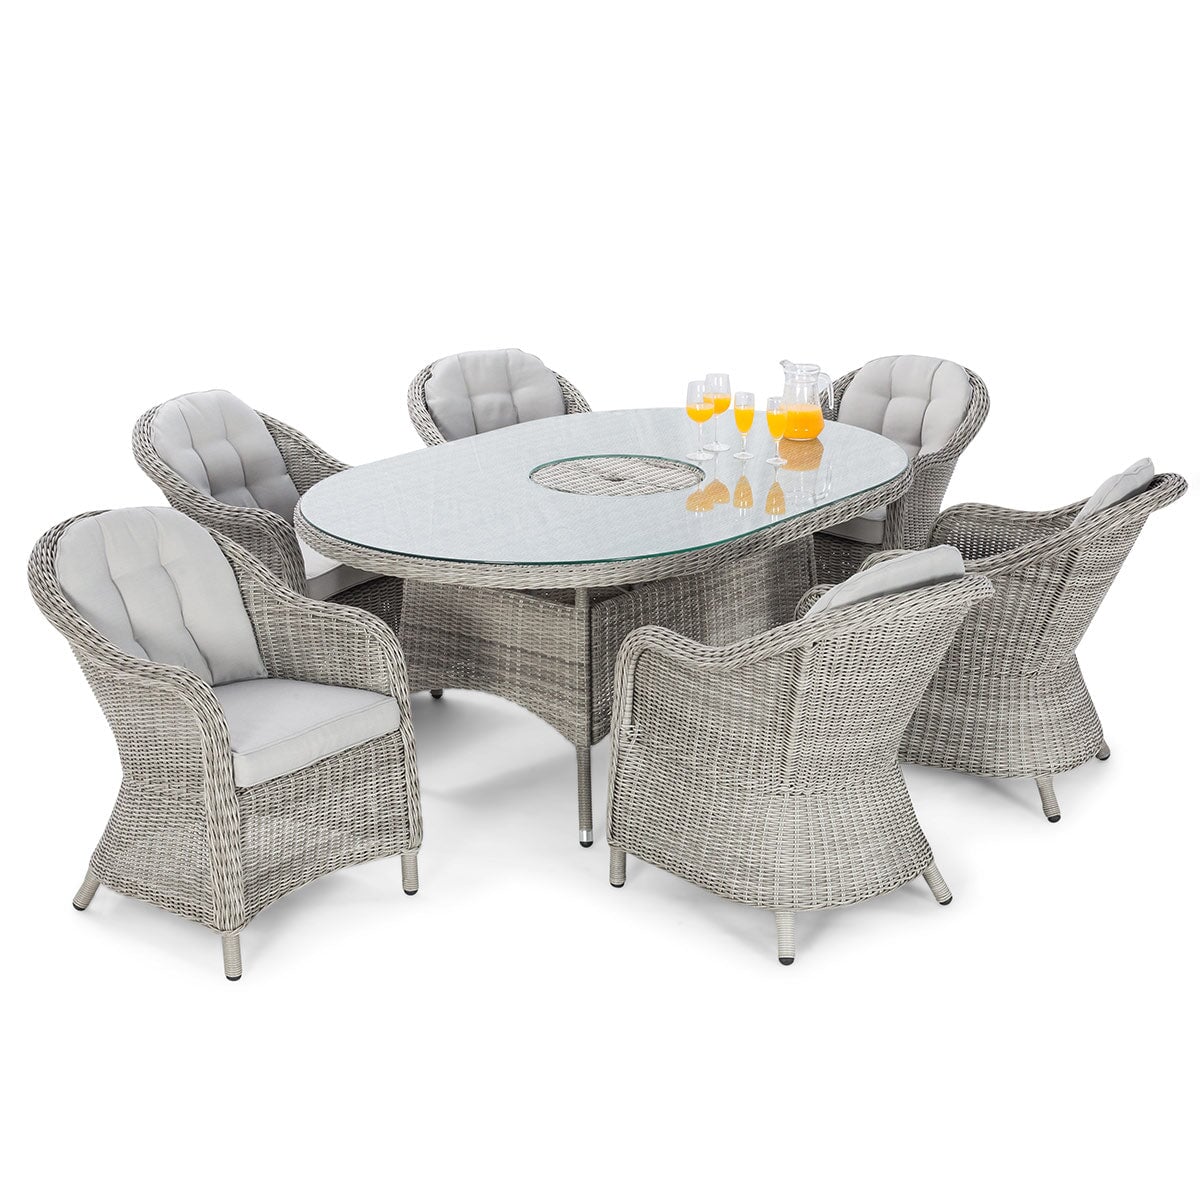 Oxford 6 Seat Oval Ice Bucket Dining Set with 
Heritage Chairs and Lazy Susan | Light Grey